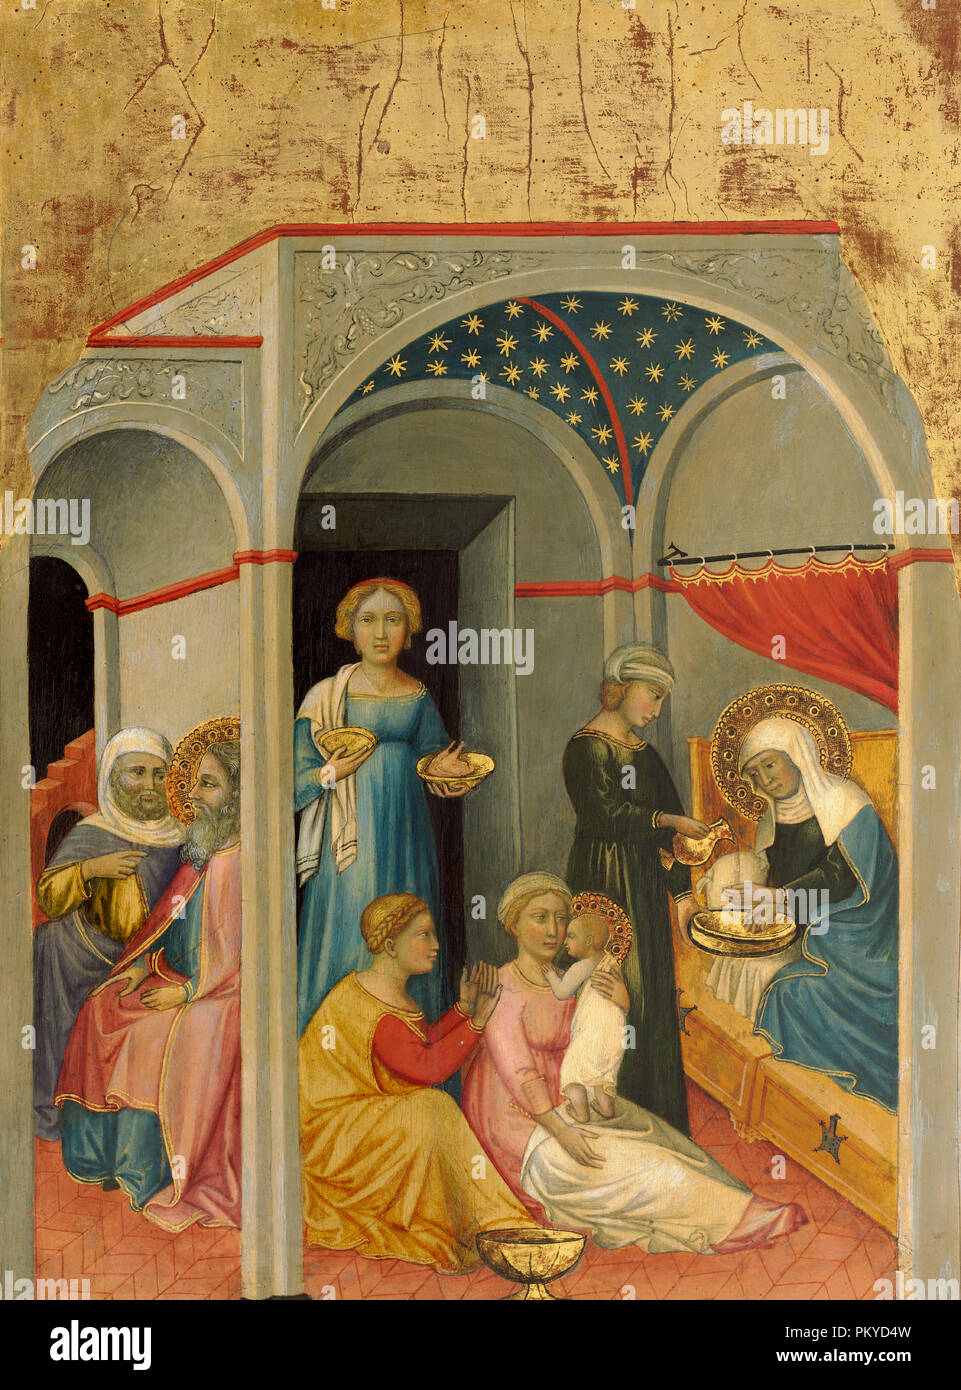 The Nativity of the Virgin. Dated: c. 1400/1405. Dimensions: painted surface: 44.2 × 32.5 cm (17 3/8 × 12 13/16 in.)  overall: 46.7 × 33.9 × 0.6 cm (18 3/8 × 13 3/8 × 1/4 in.)  framed: 48.3 x 36.8 x 4.1 cm (19 x 14 1/2 x 1 5/8 in.). Medium: tempera on poplar panel. Museum: National Gallery of Art, Washington DC. Author: ANDREA DI BARTOLO. Stock Photo